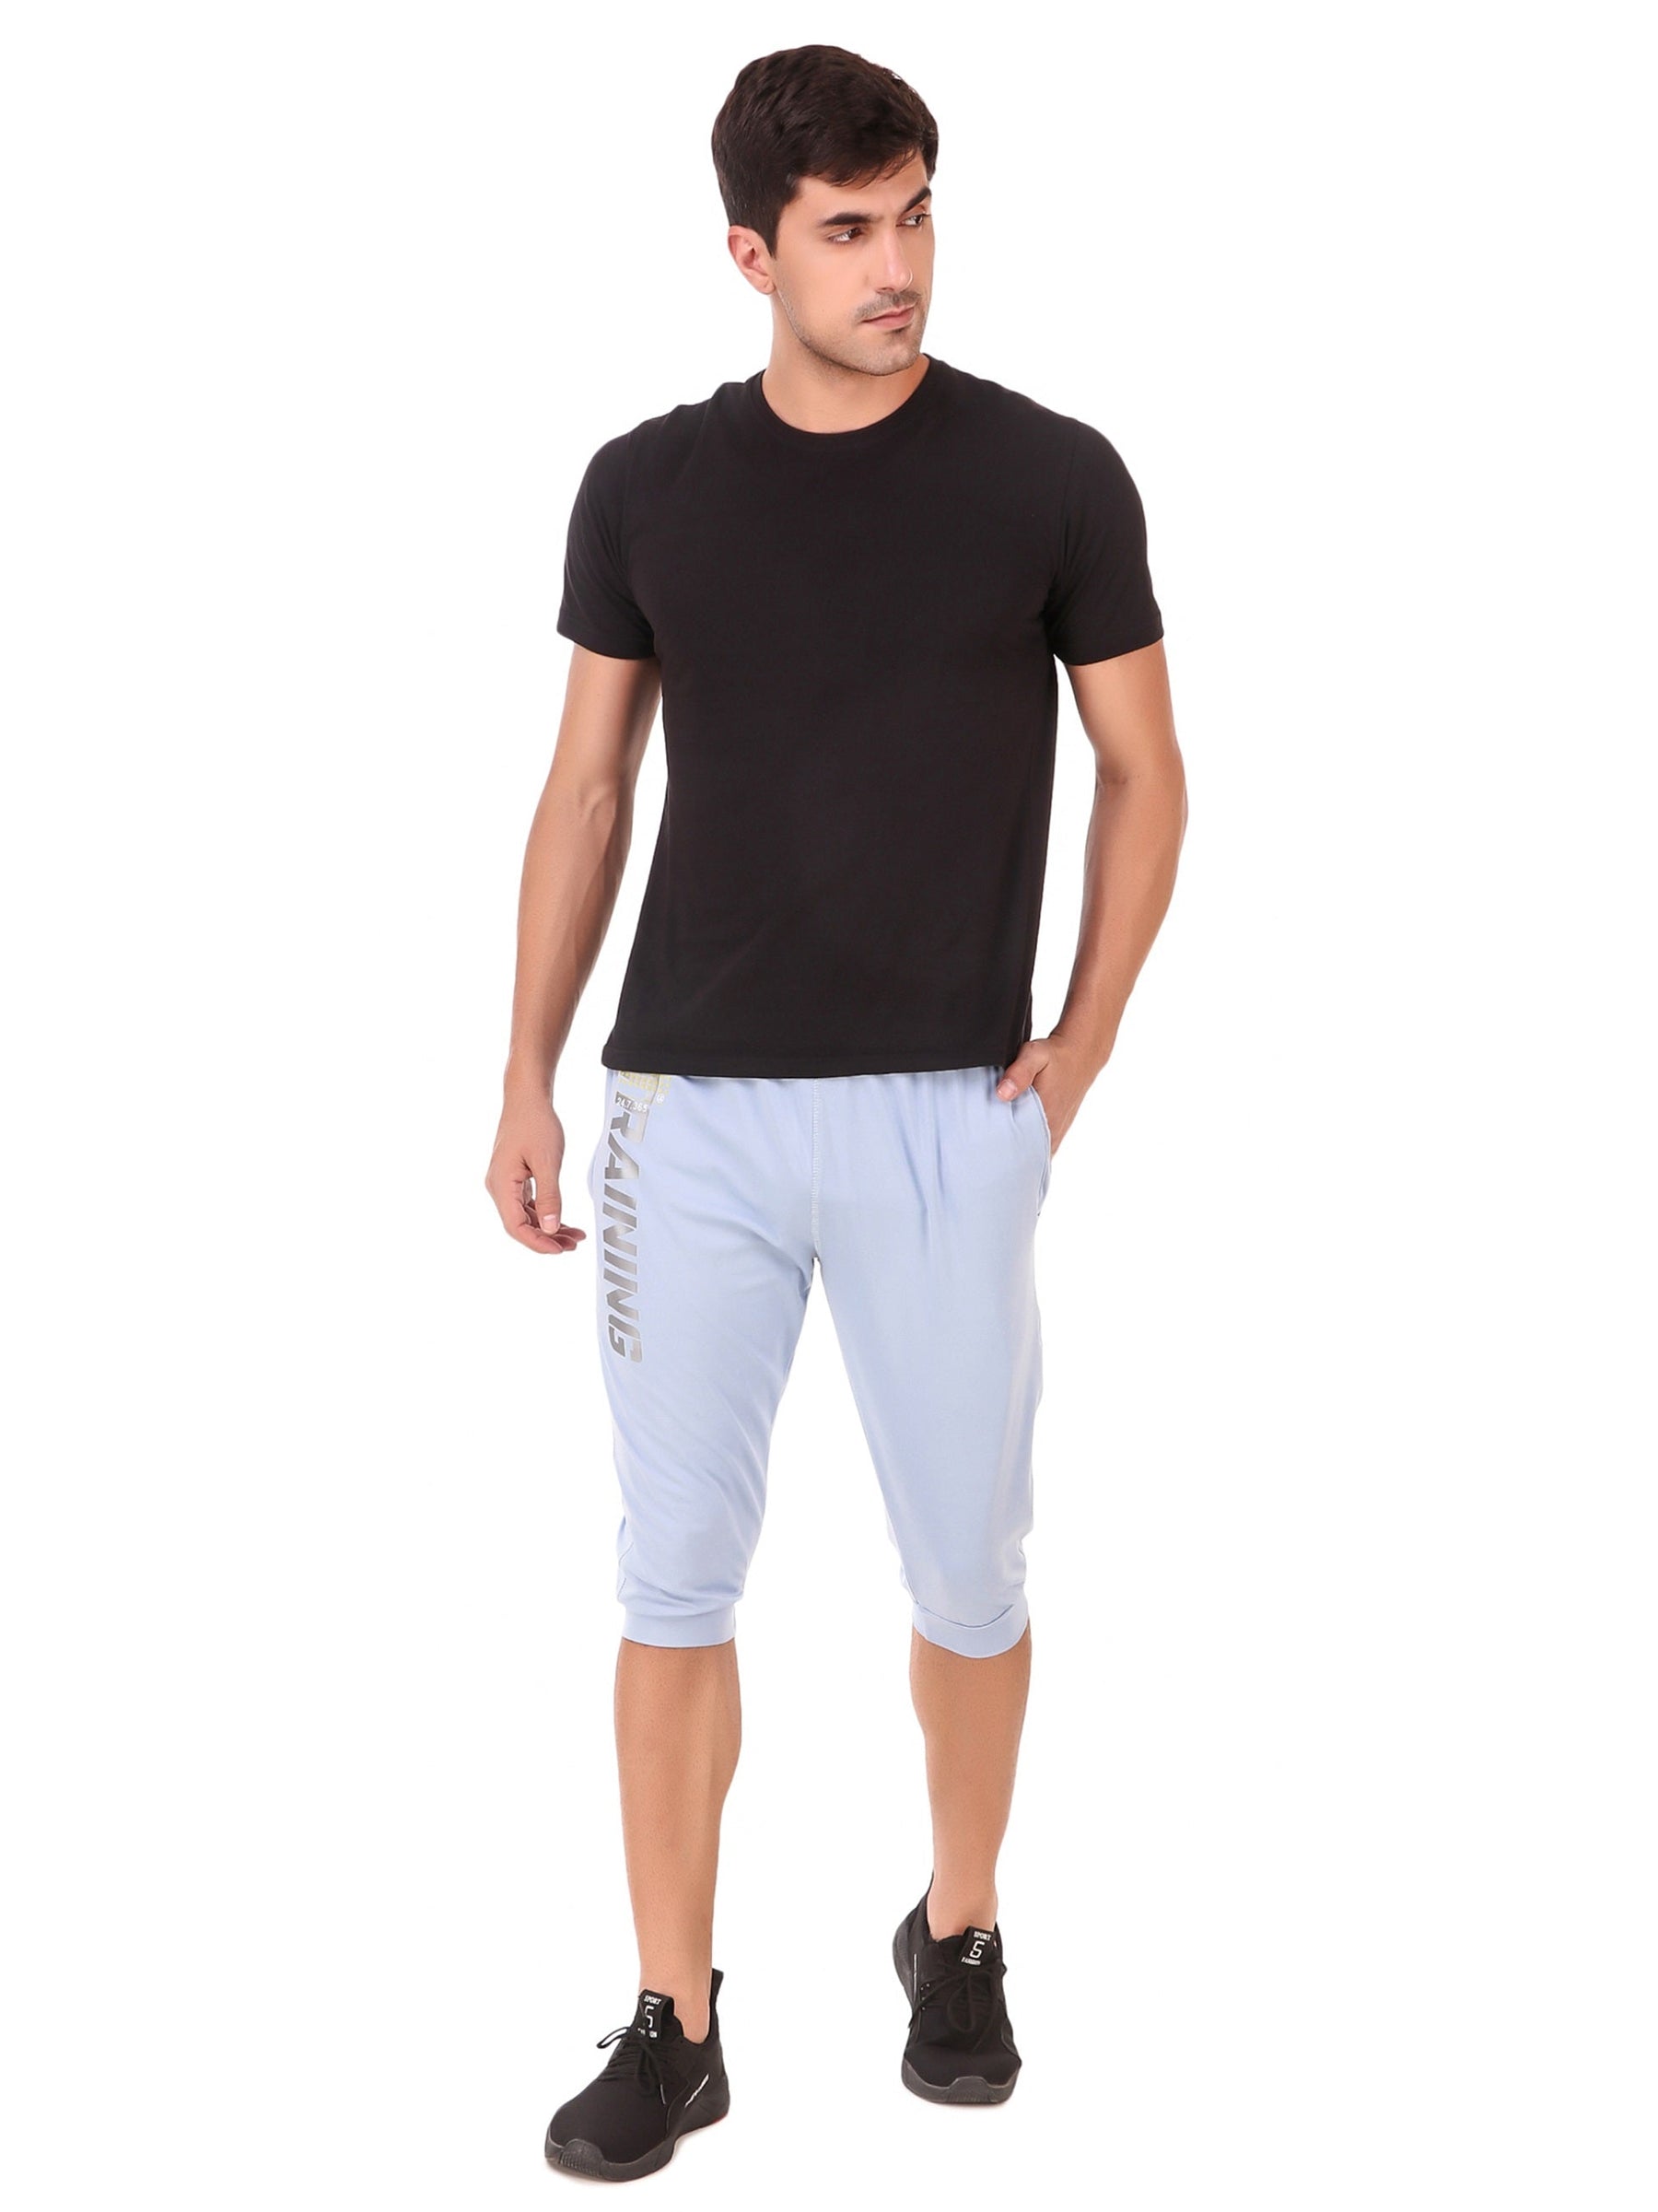 Men's Stretchable Lycra 3/4th Capri with 2 Zippered Pockets for Gym, Yoga, Workout and Casual Wear